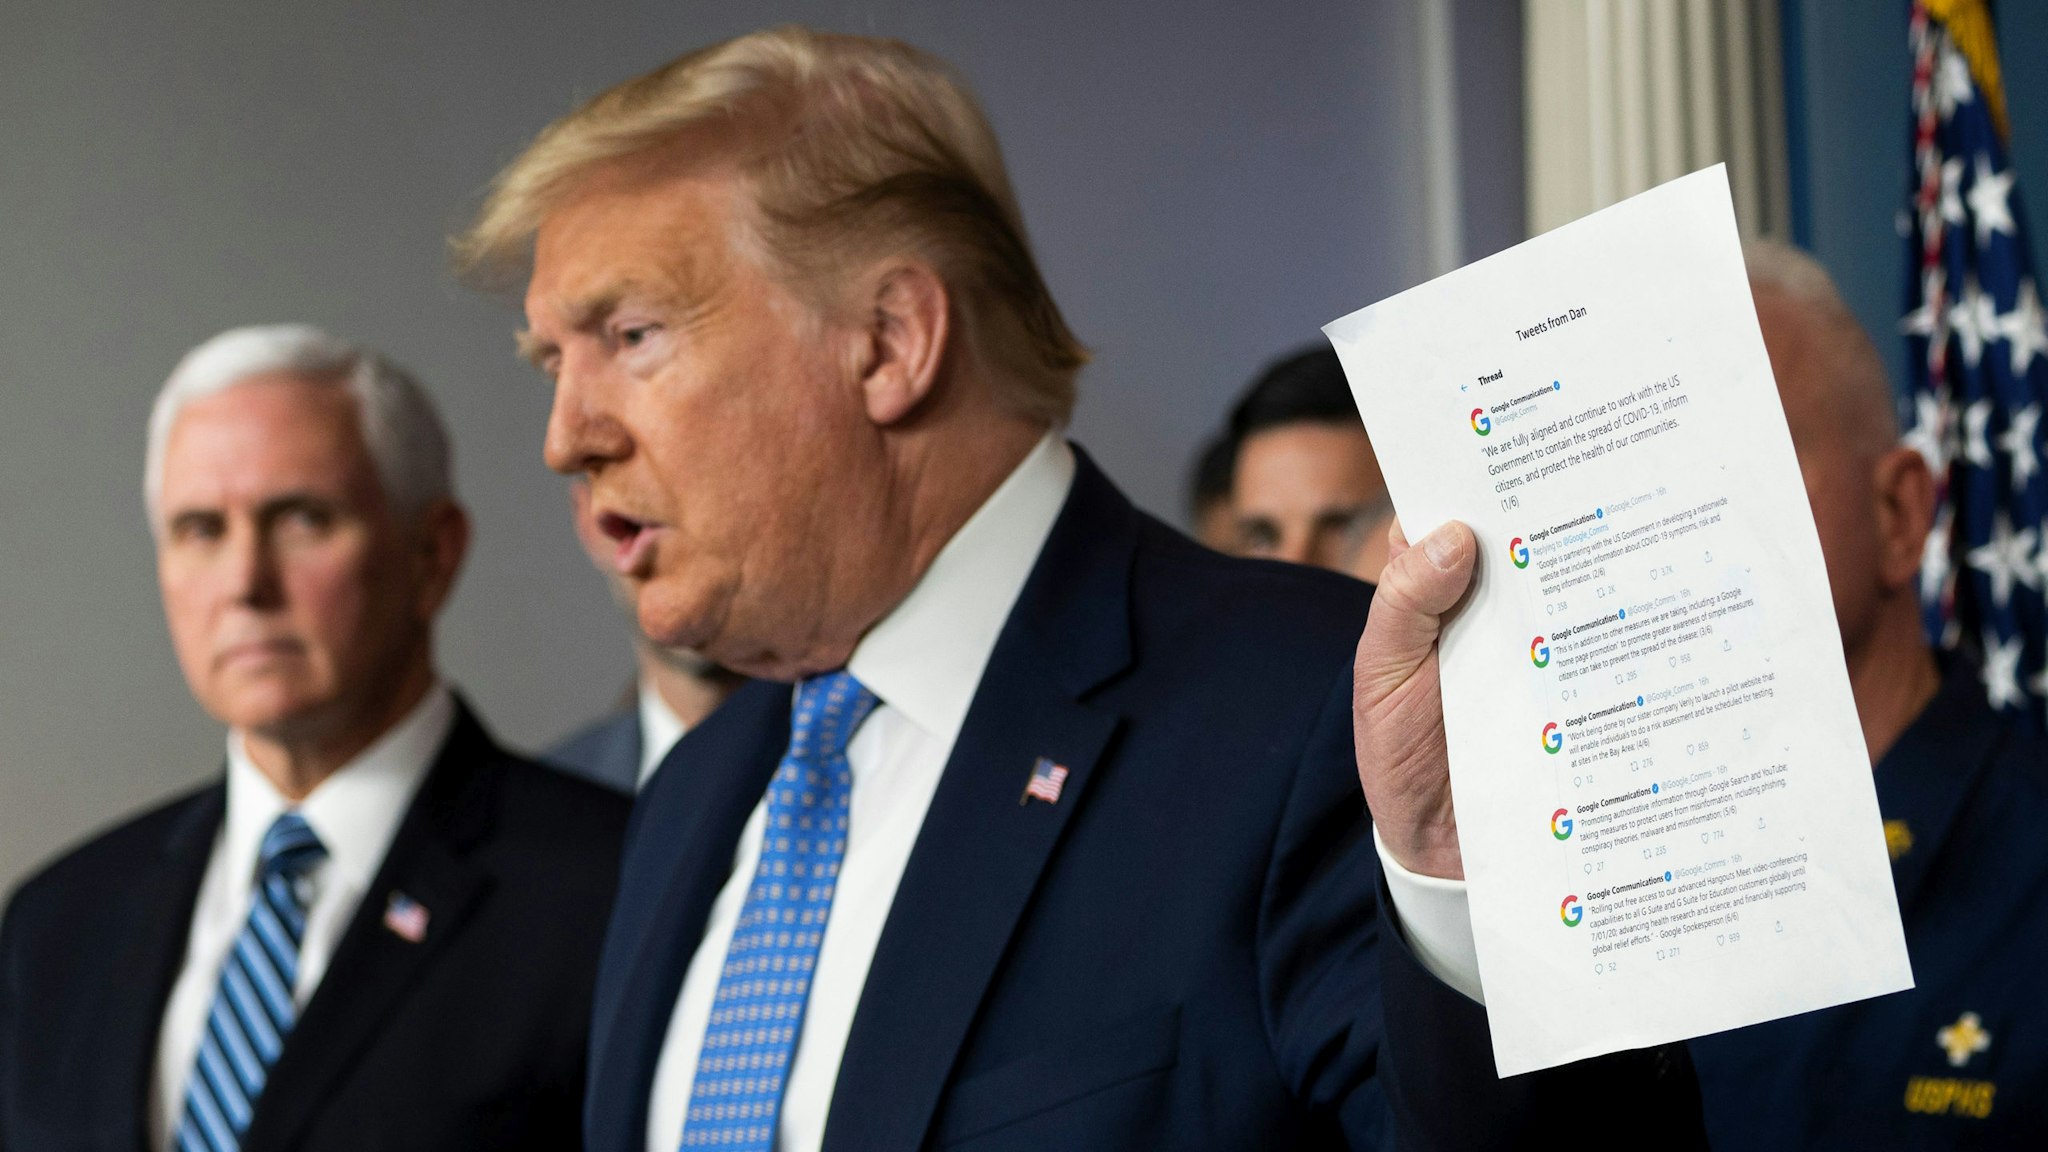 US President Donald Trump holds up tweets from Google as he speaks during a press briefing about the Coronavirus (COVID-19) alongside US Vice President Mike Pence (L) and members of the Coronavirus Task Force in the Brady Press Briefing Room at the White House in Washington, DC, March 15, 2020.